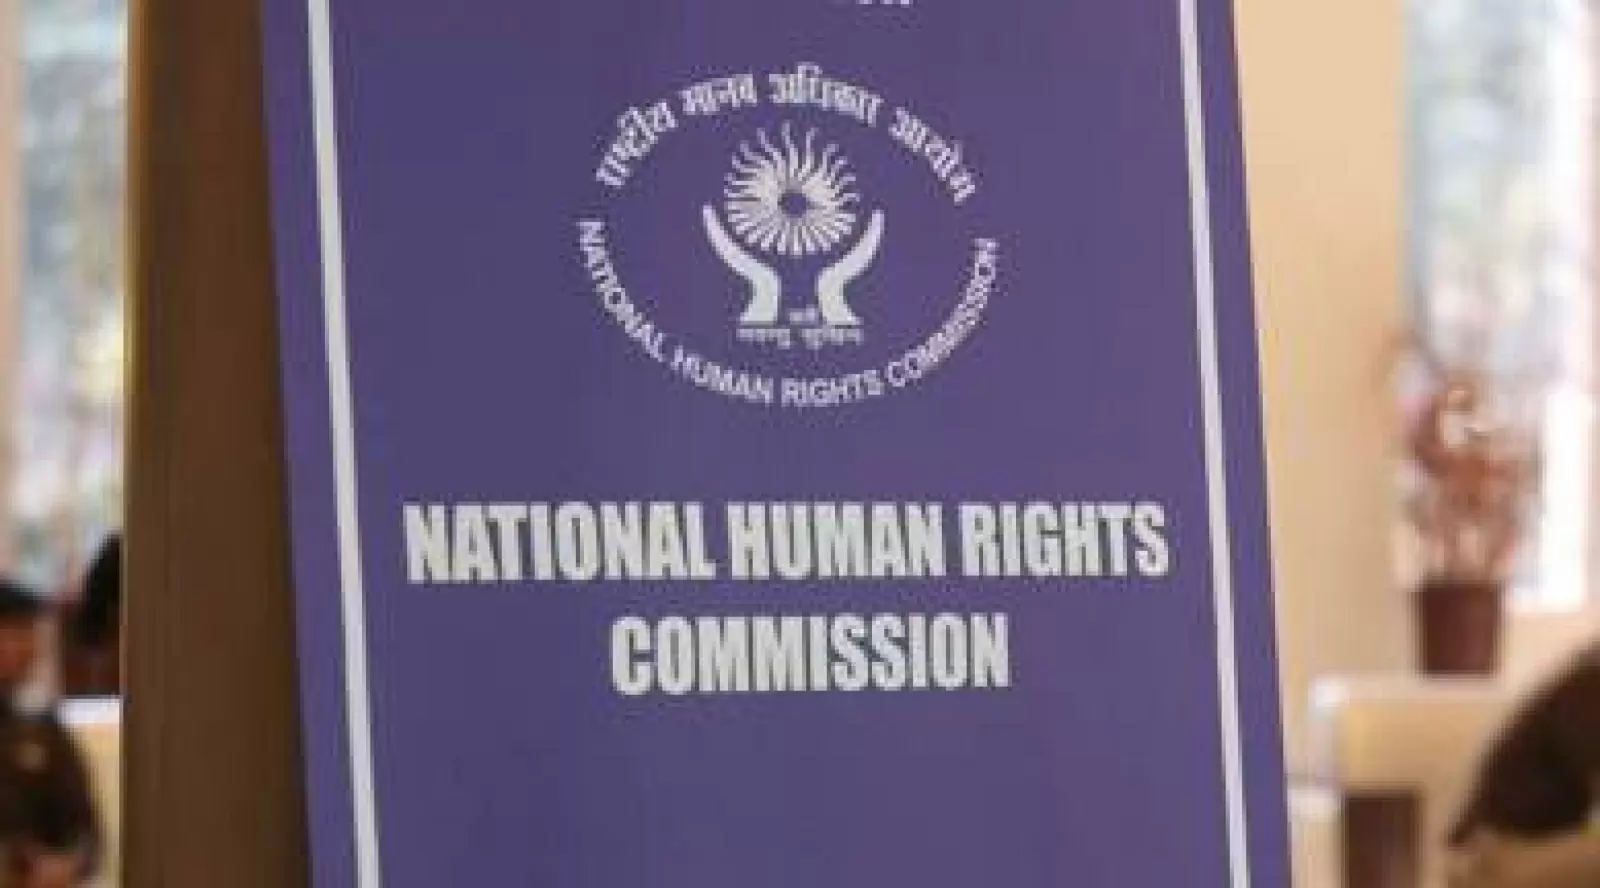 Mumbai: NHRC alert on four deaths in sewage treatment plant, notice sent to state government and police chief